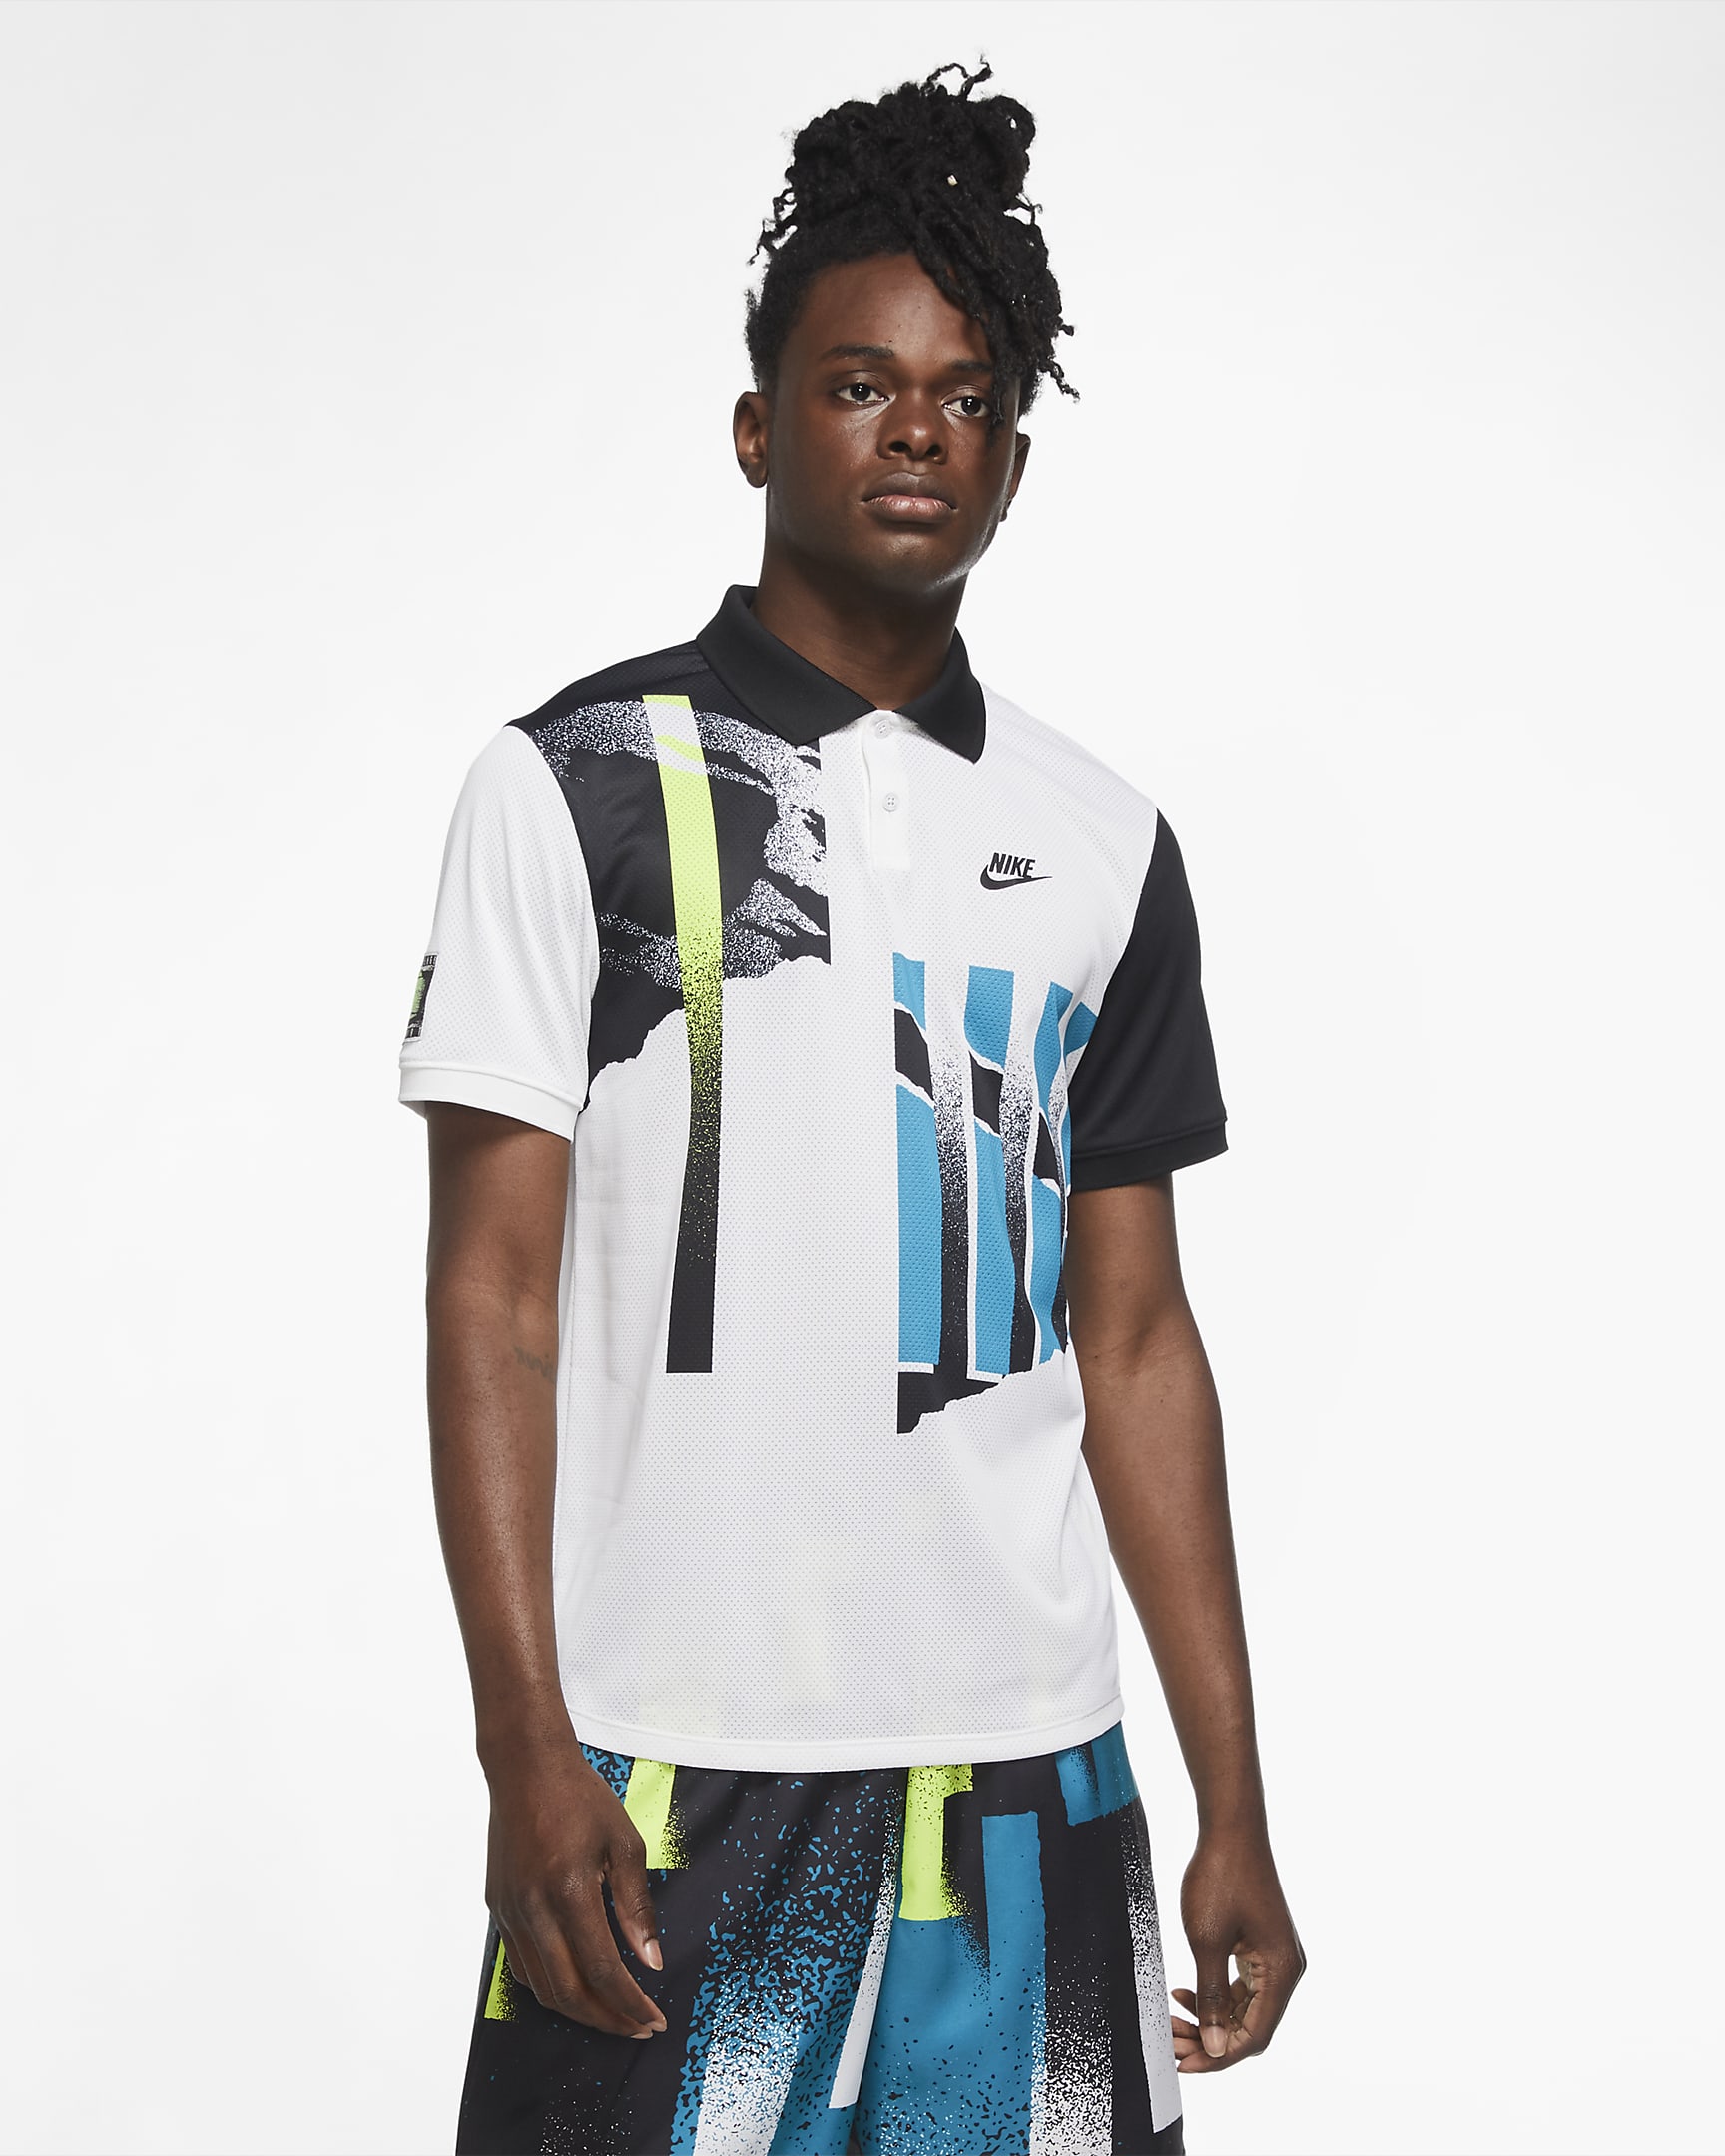 New Nike collection inspired by Agassi 